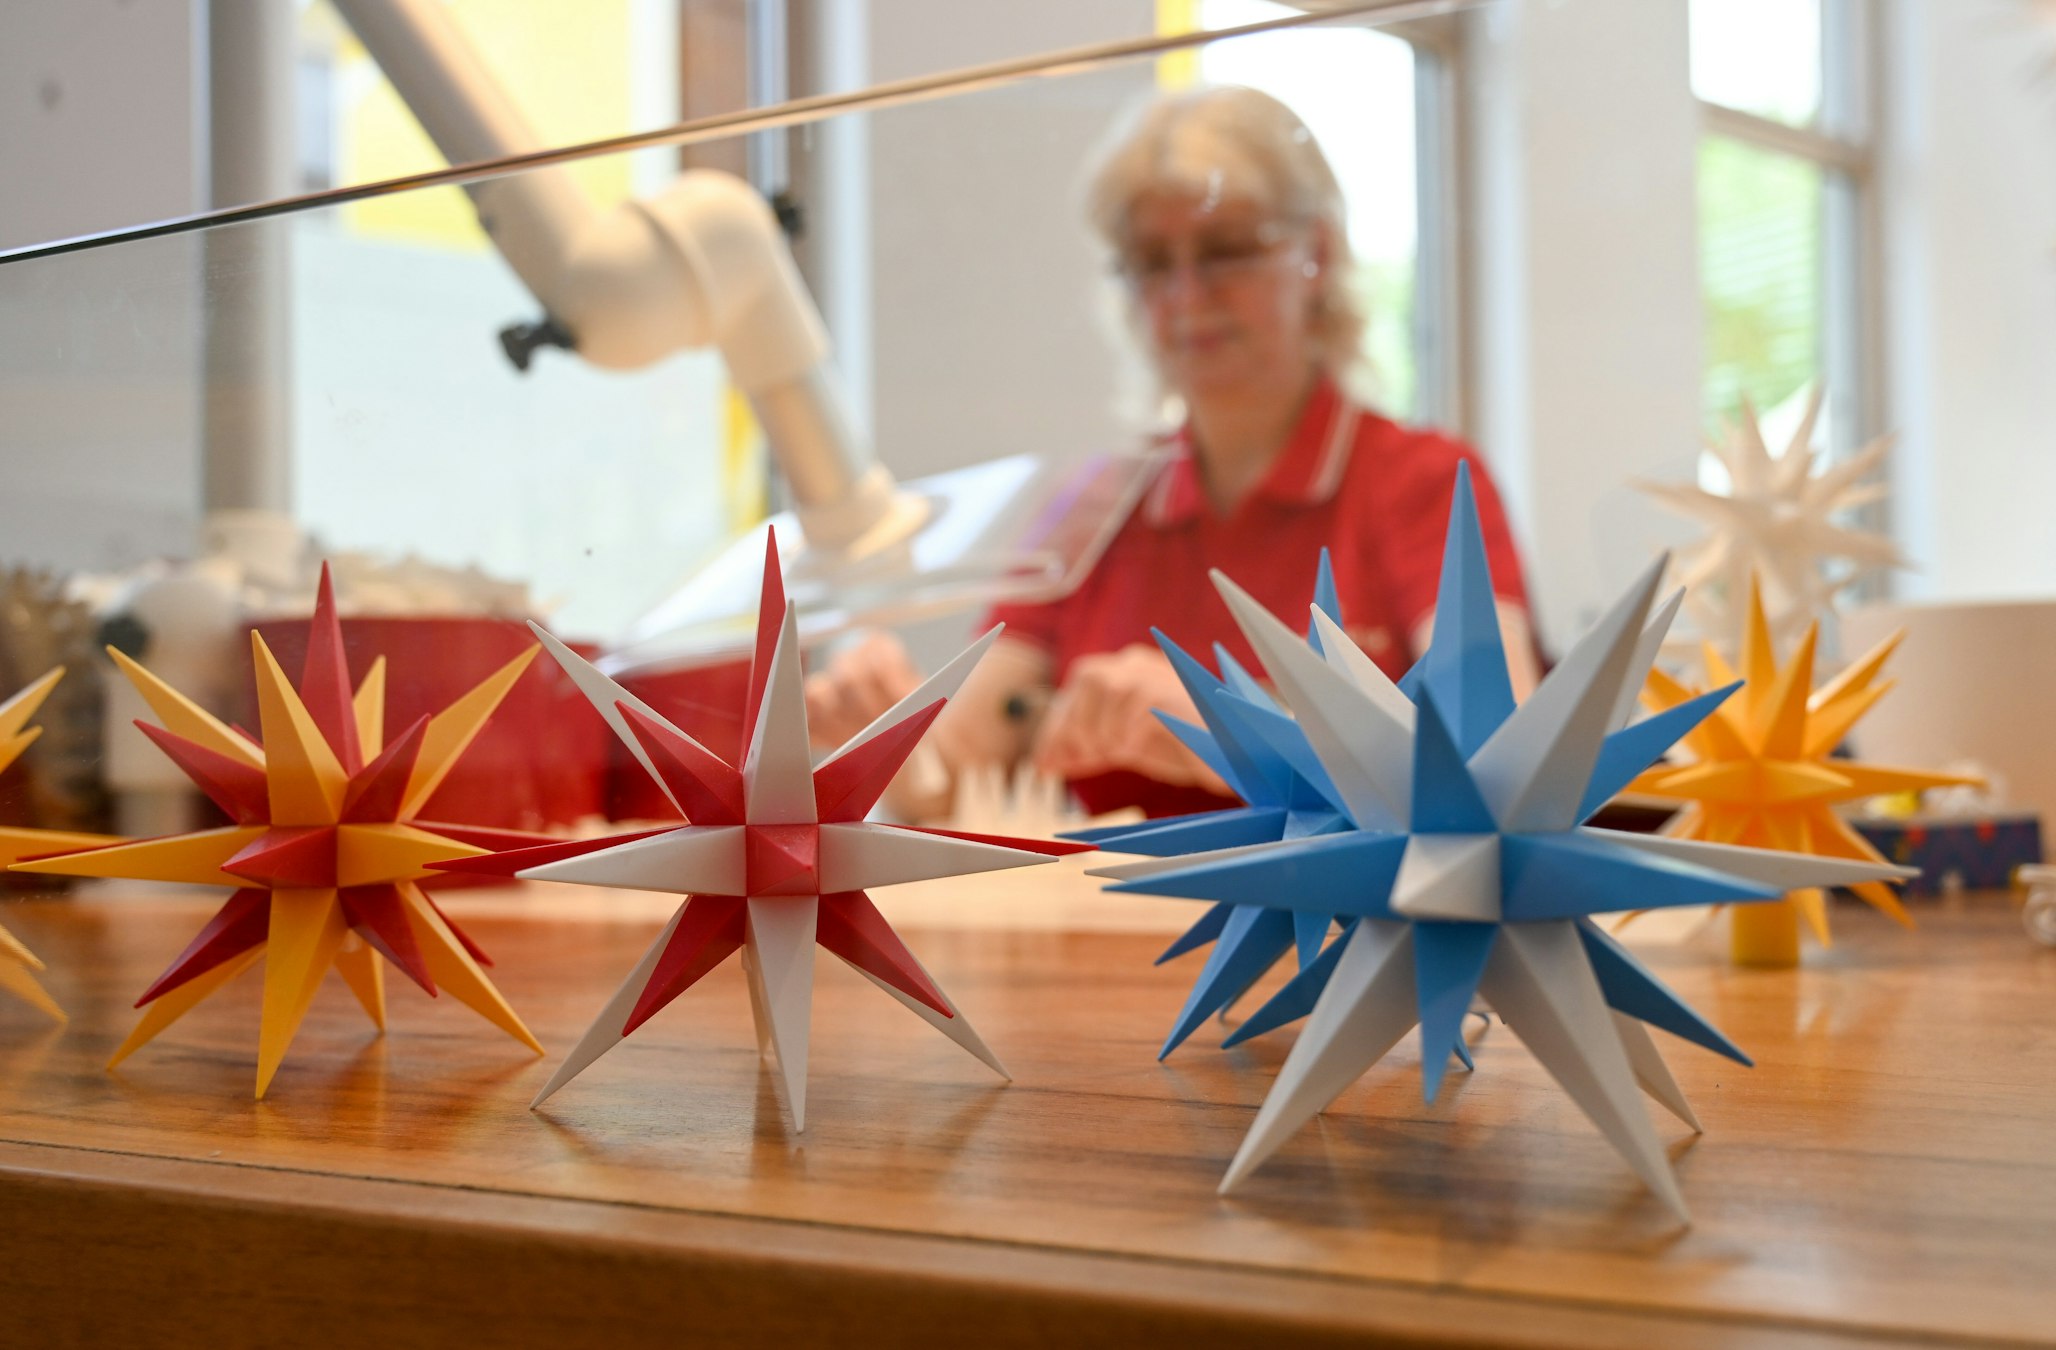 Moravian star factory: 125 years of Christmas — and geometry